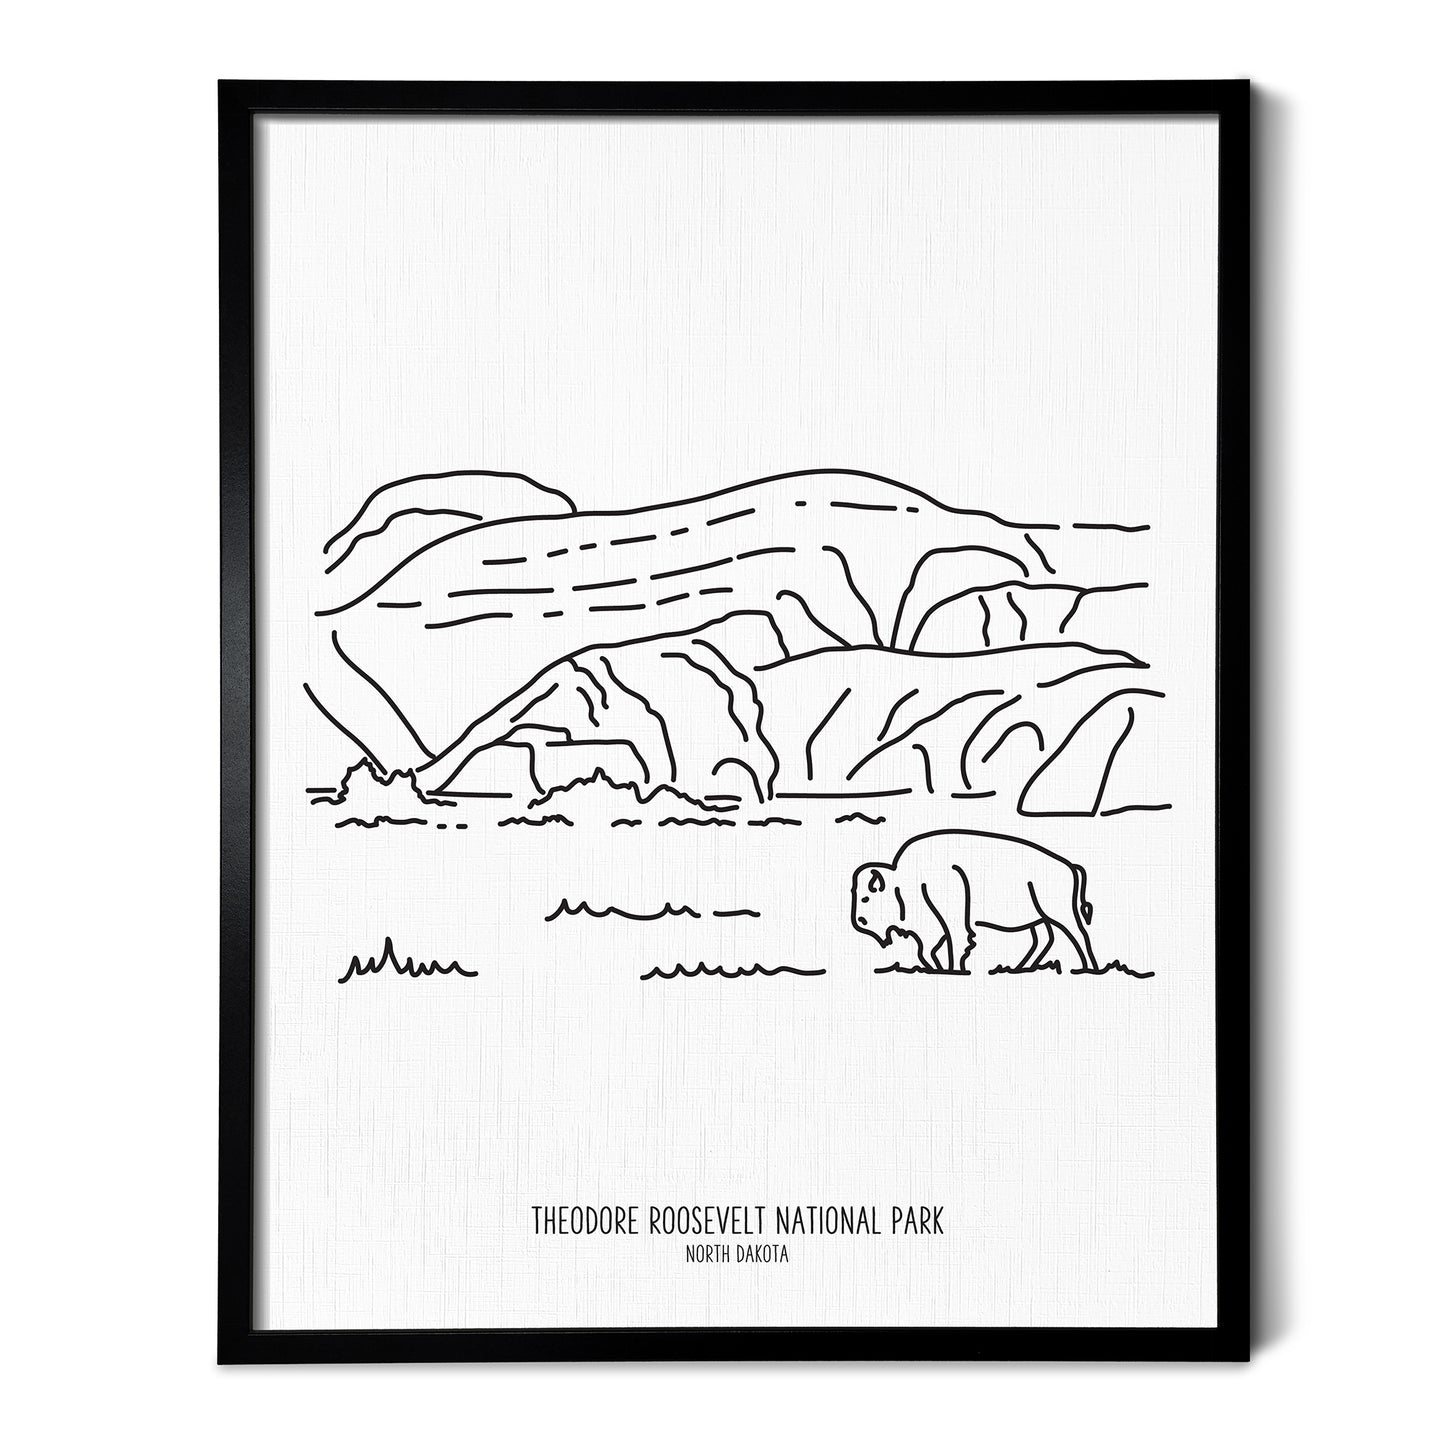 A line art drawing of Theodore Roosevelt National Park on white linen paper in a thin black picture frame